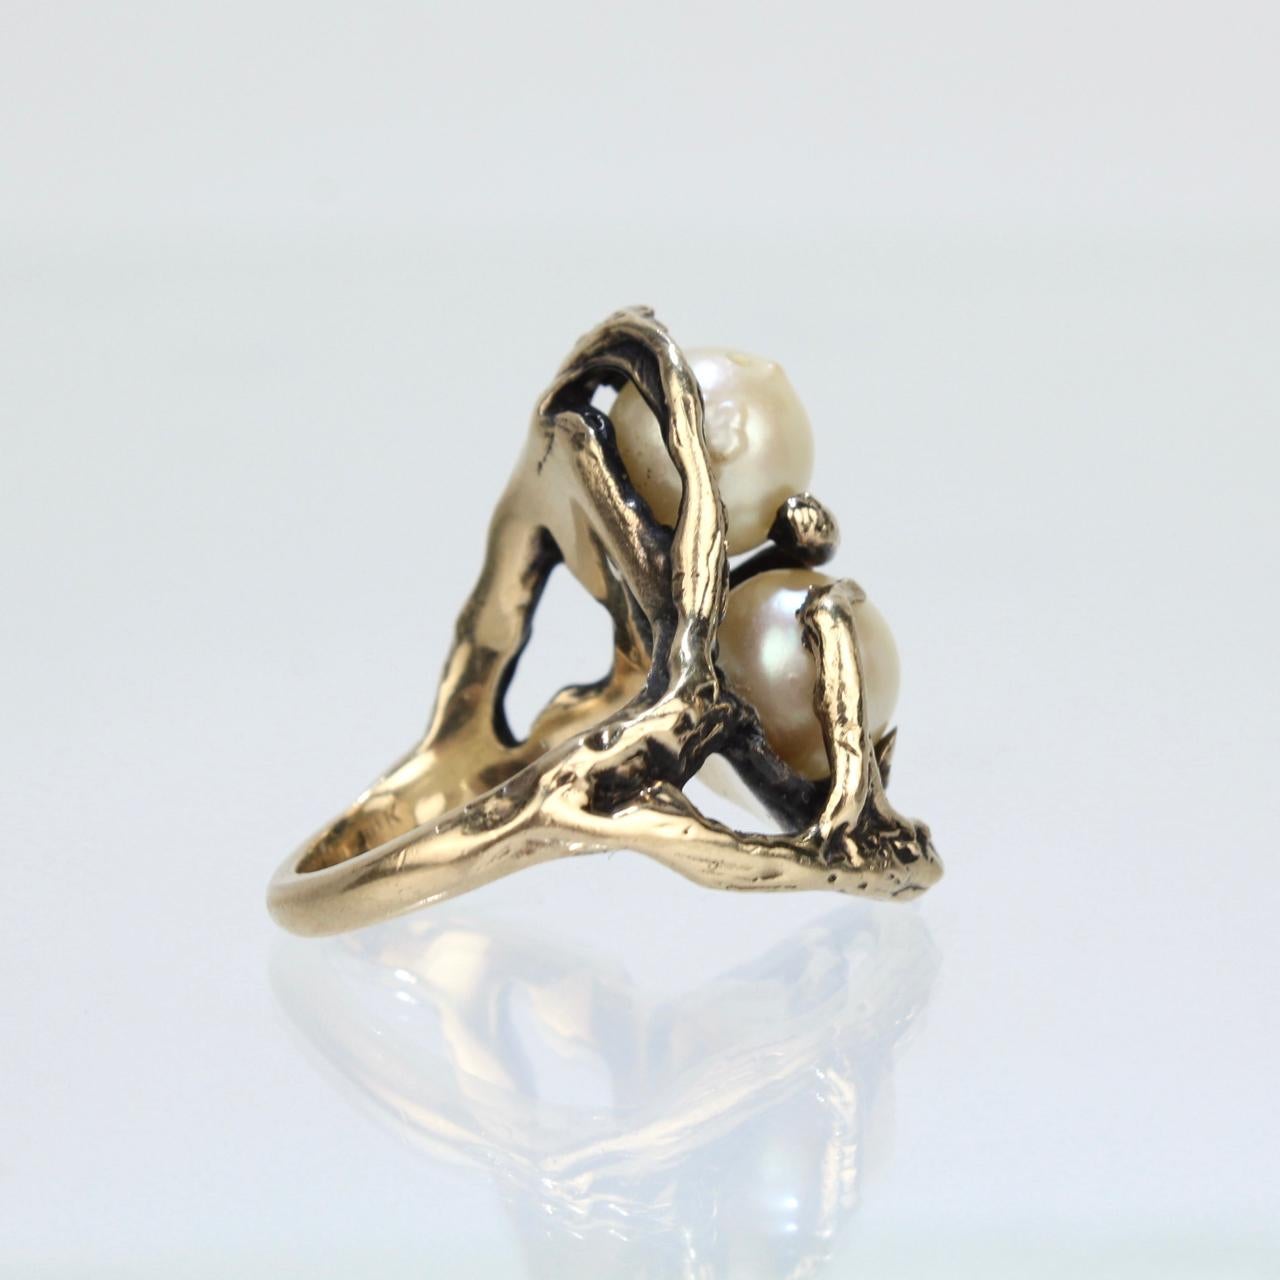 Modernist Retro Brutalist 14 Karat Gold and Double Pearl Moi et Toi Cocktail Ring